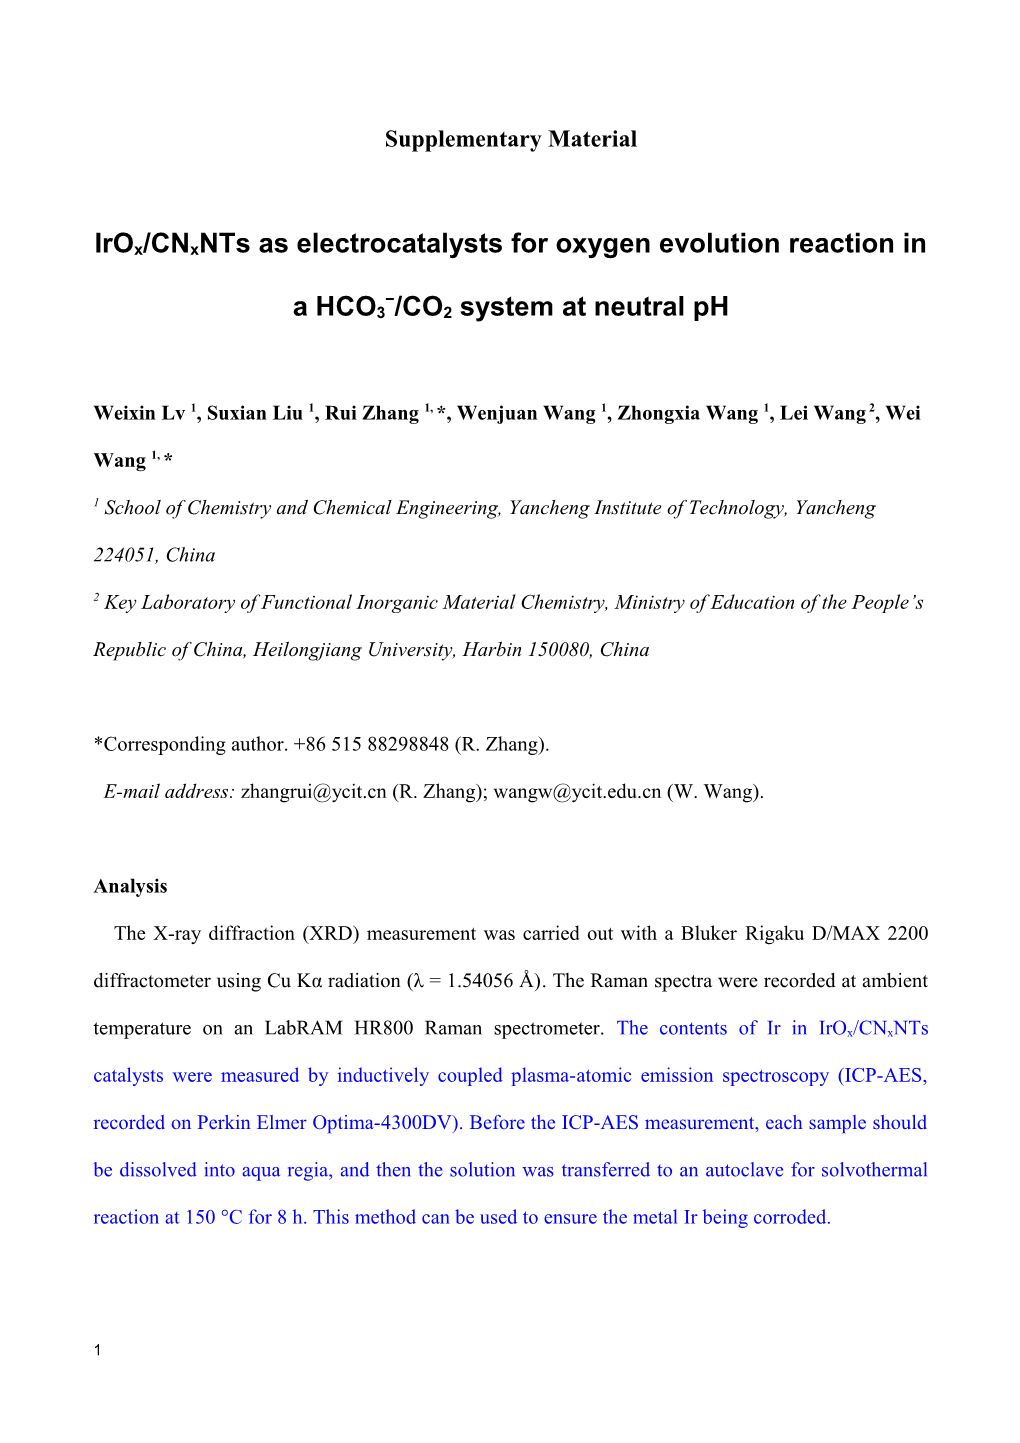 Irox/Cnxnts As Electrocatalysts for Oxygen Evolution Reaction in a HCO3 /CO2 System At